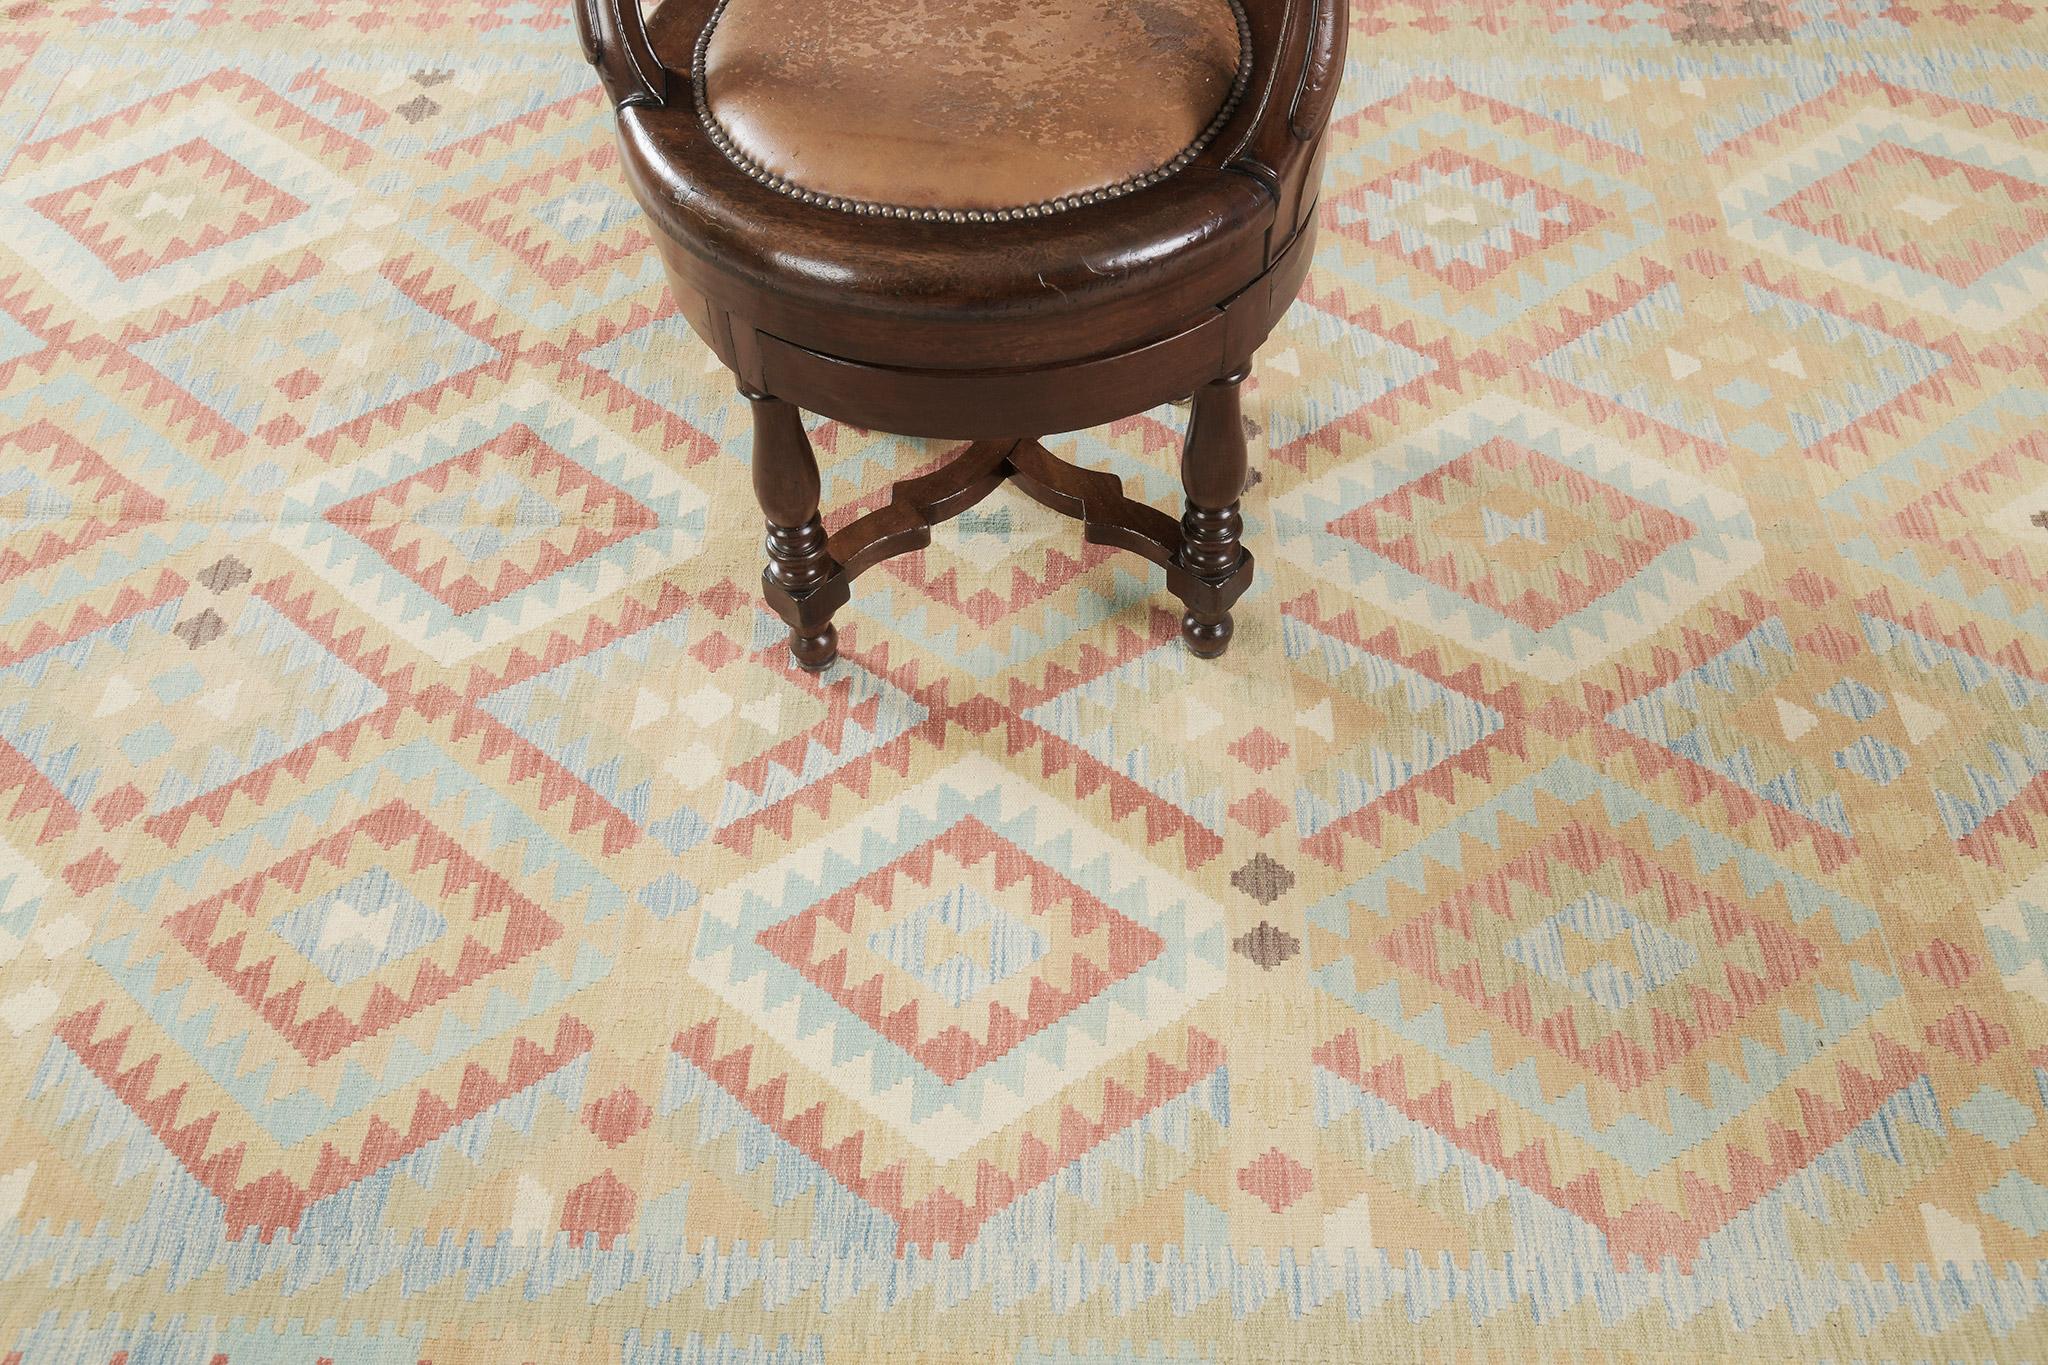 The geometrical patterns create a positive and pleasant design for an enormous variety of interiors. This remarkable vintage-styled flatweave Kilim features geometrical motifs and symbols through a warm-toned palette. A masterpiece that will